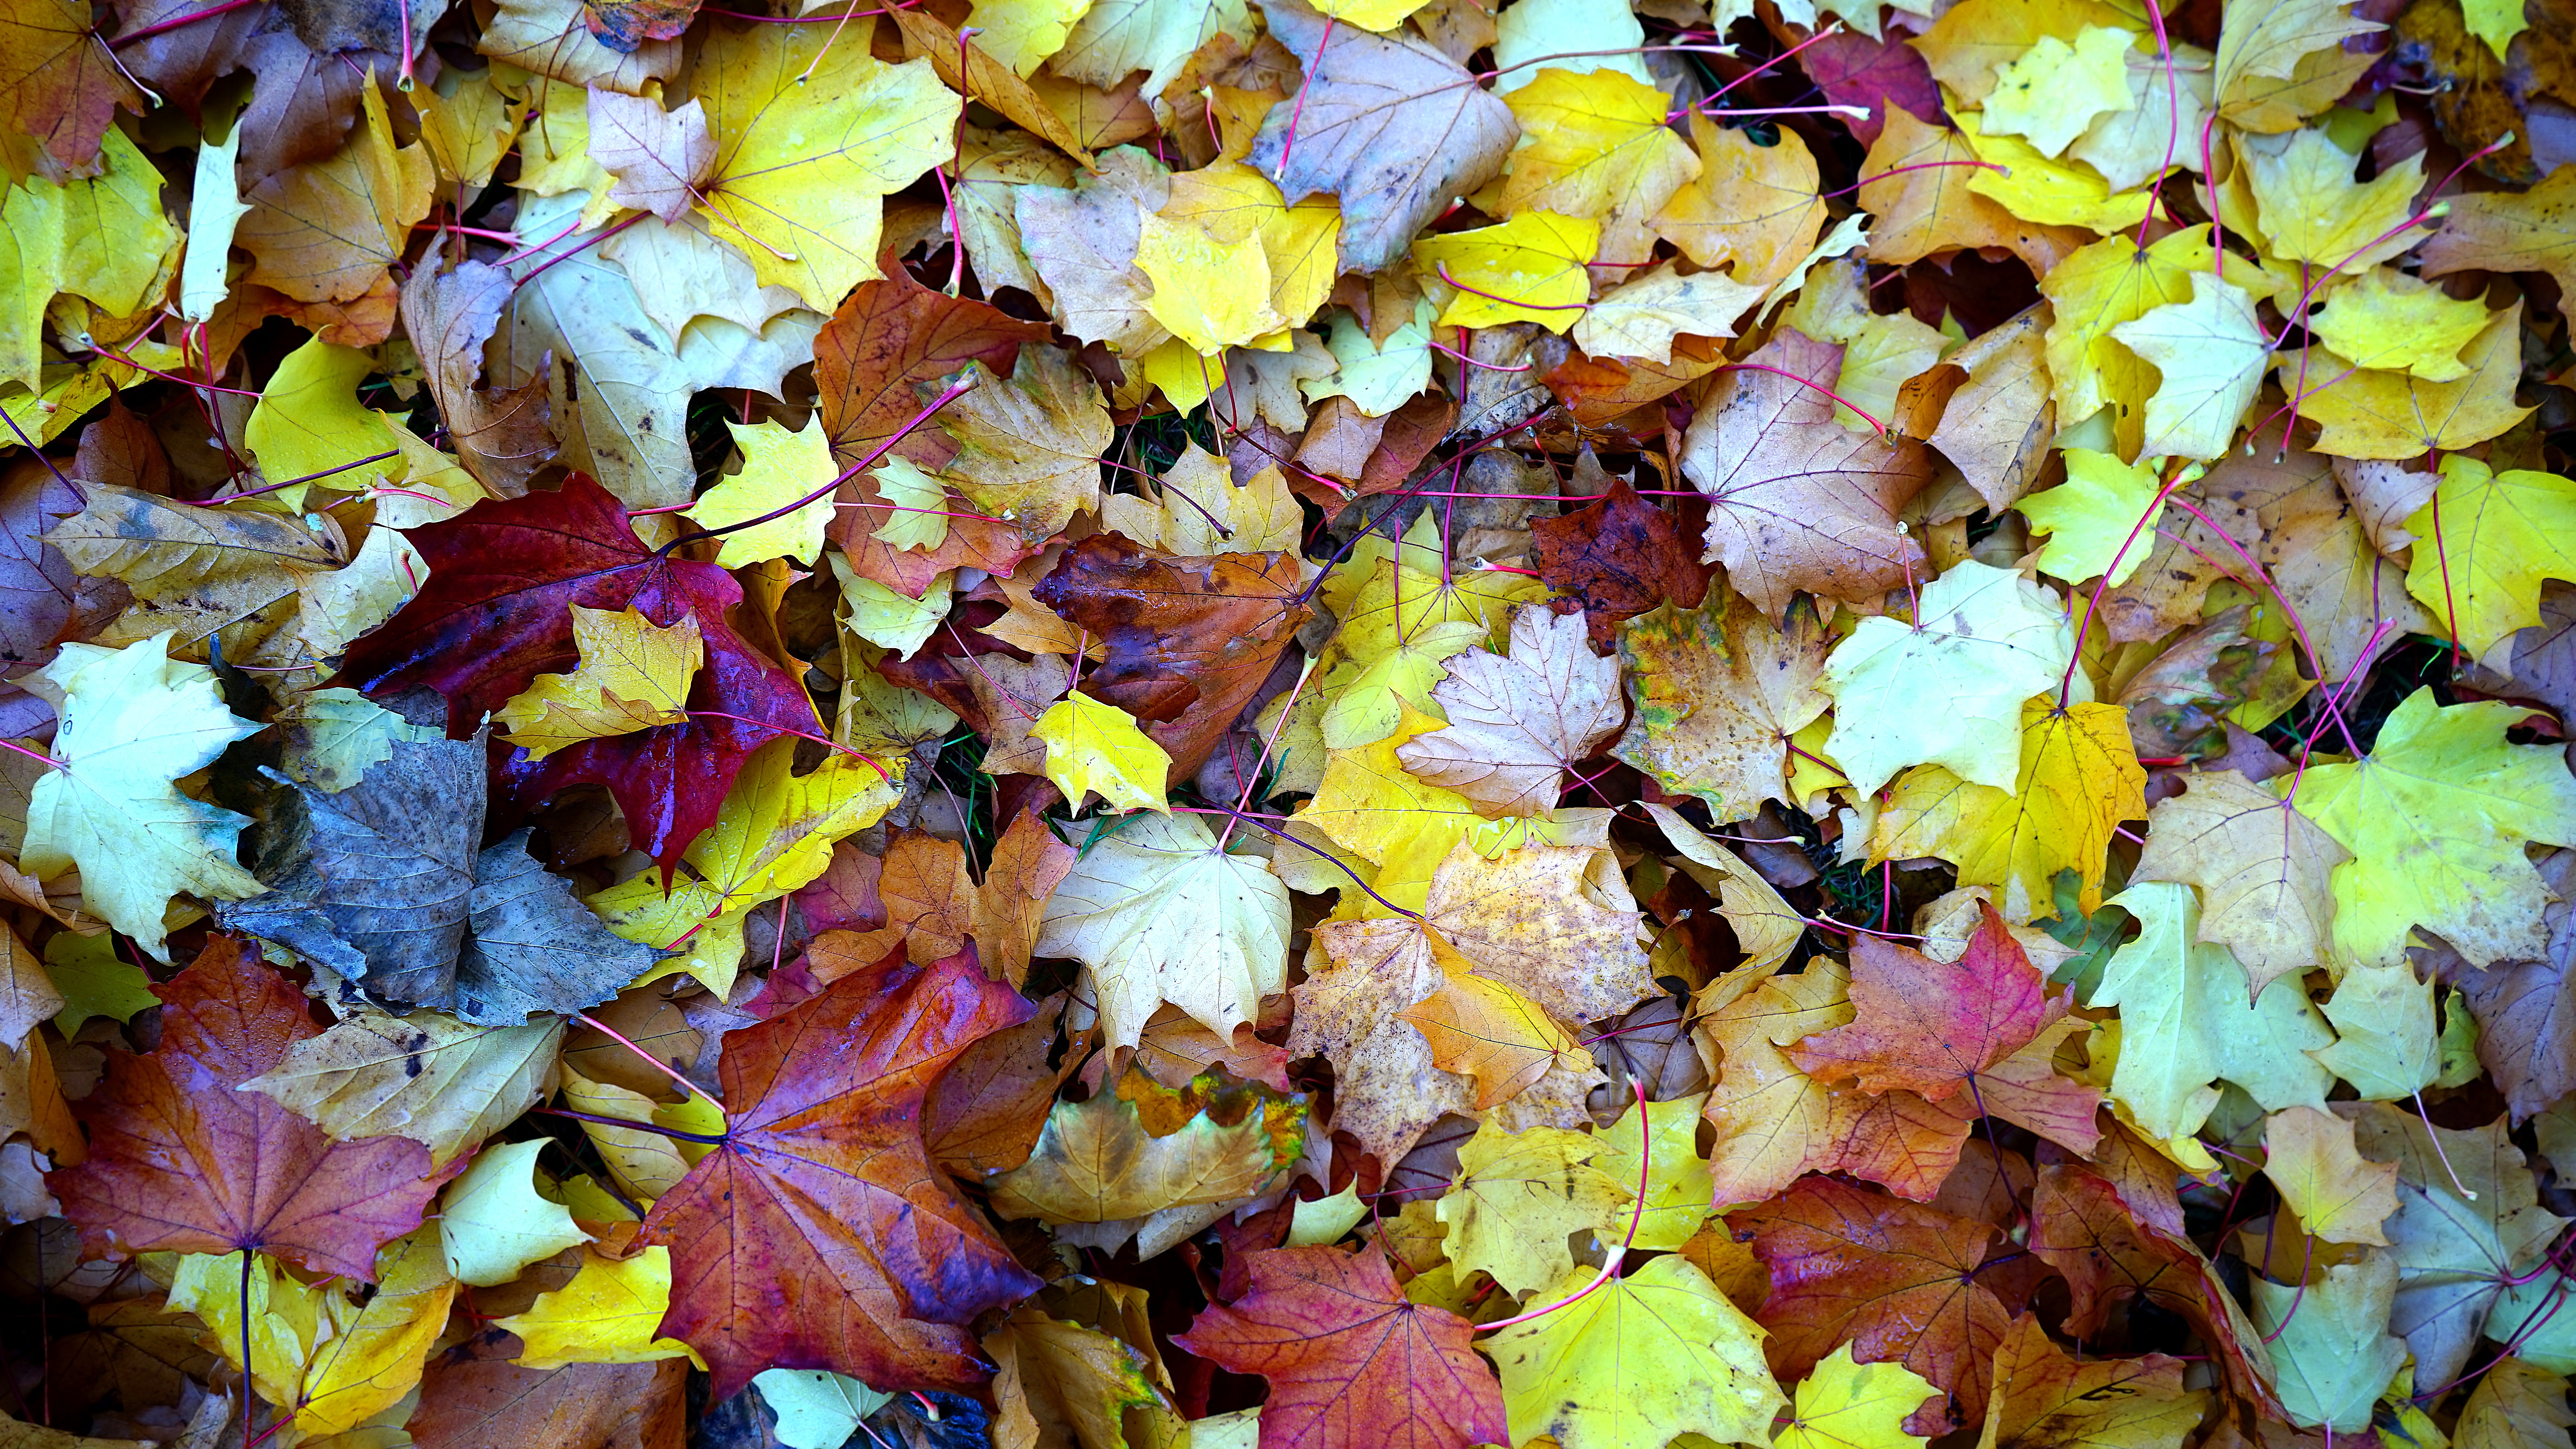 Maple Leaves on Ground Close Up Photo during Daytime, Abstract, Foliage, Texture, Season, HQ Photo